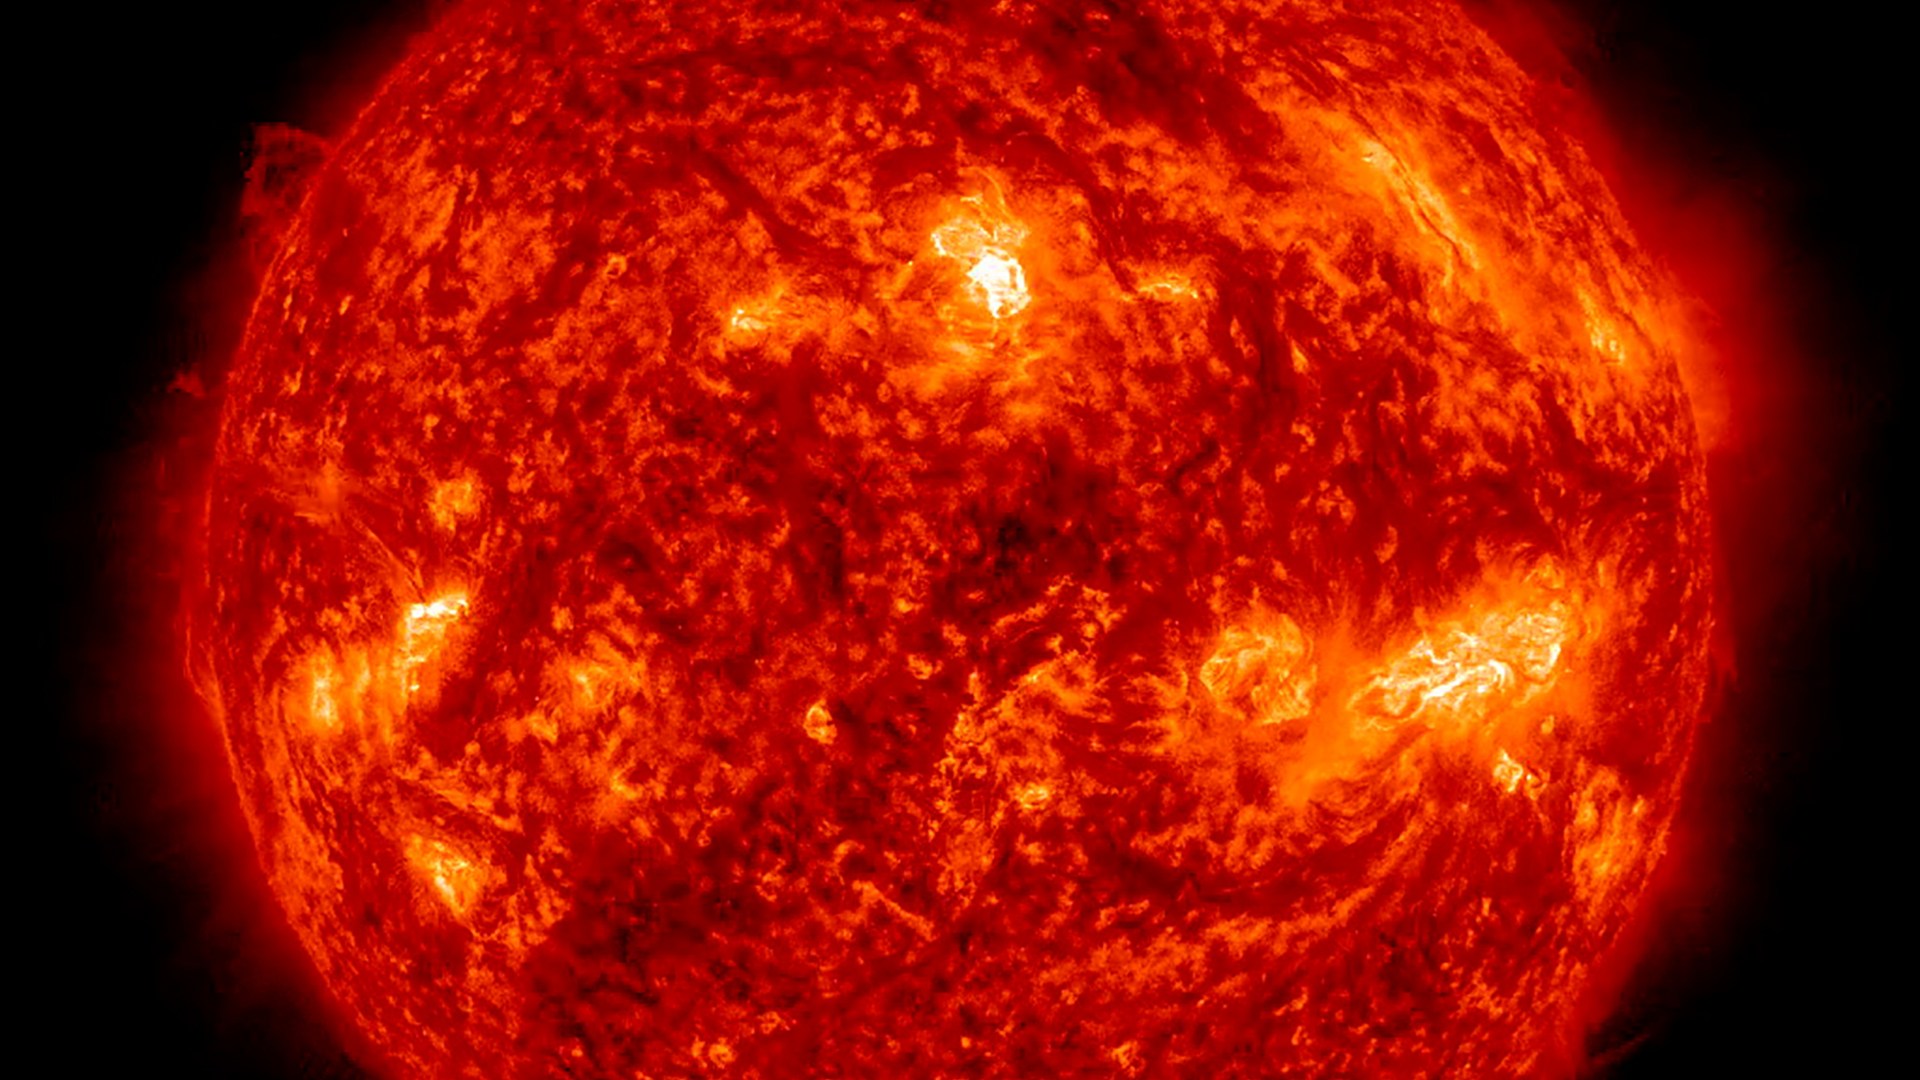 Watch incredible moment Sun blasts FOUR solar flares in rare ‘super’ explosion that risks wreaking havoc on Earth [Video]